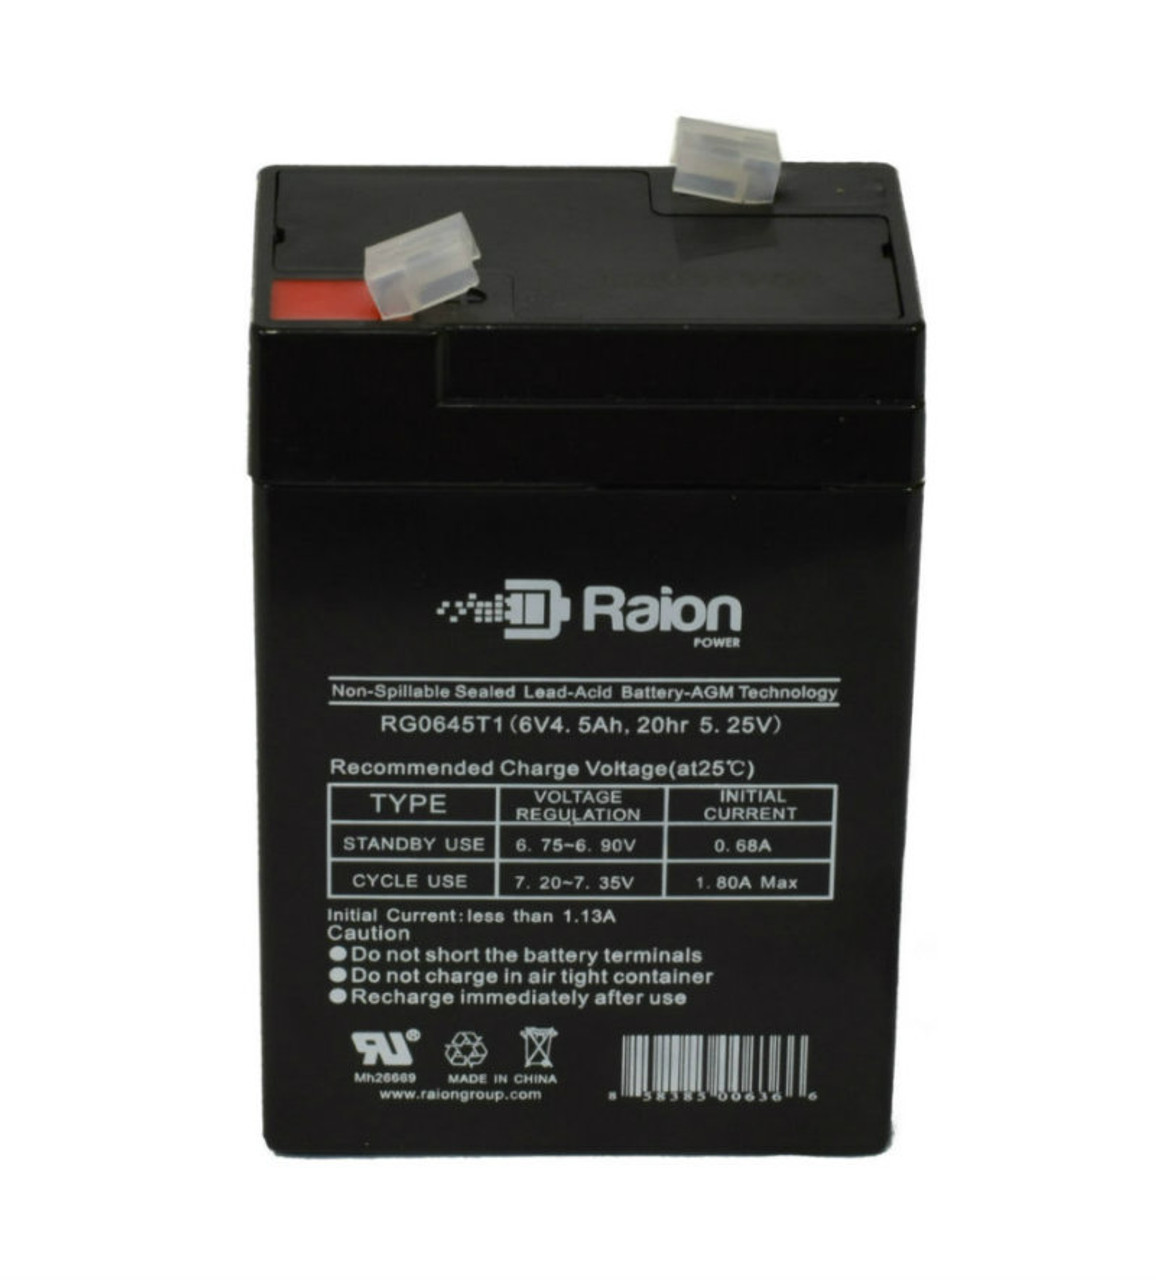 Raion Power RG0645T1 Replacement Battery Cartridge for Light Alarms CE15BK